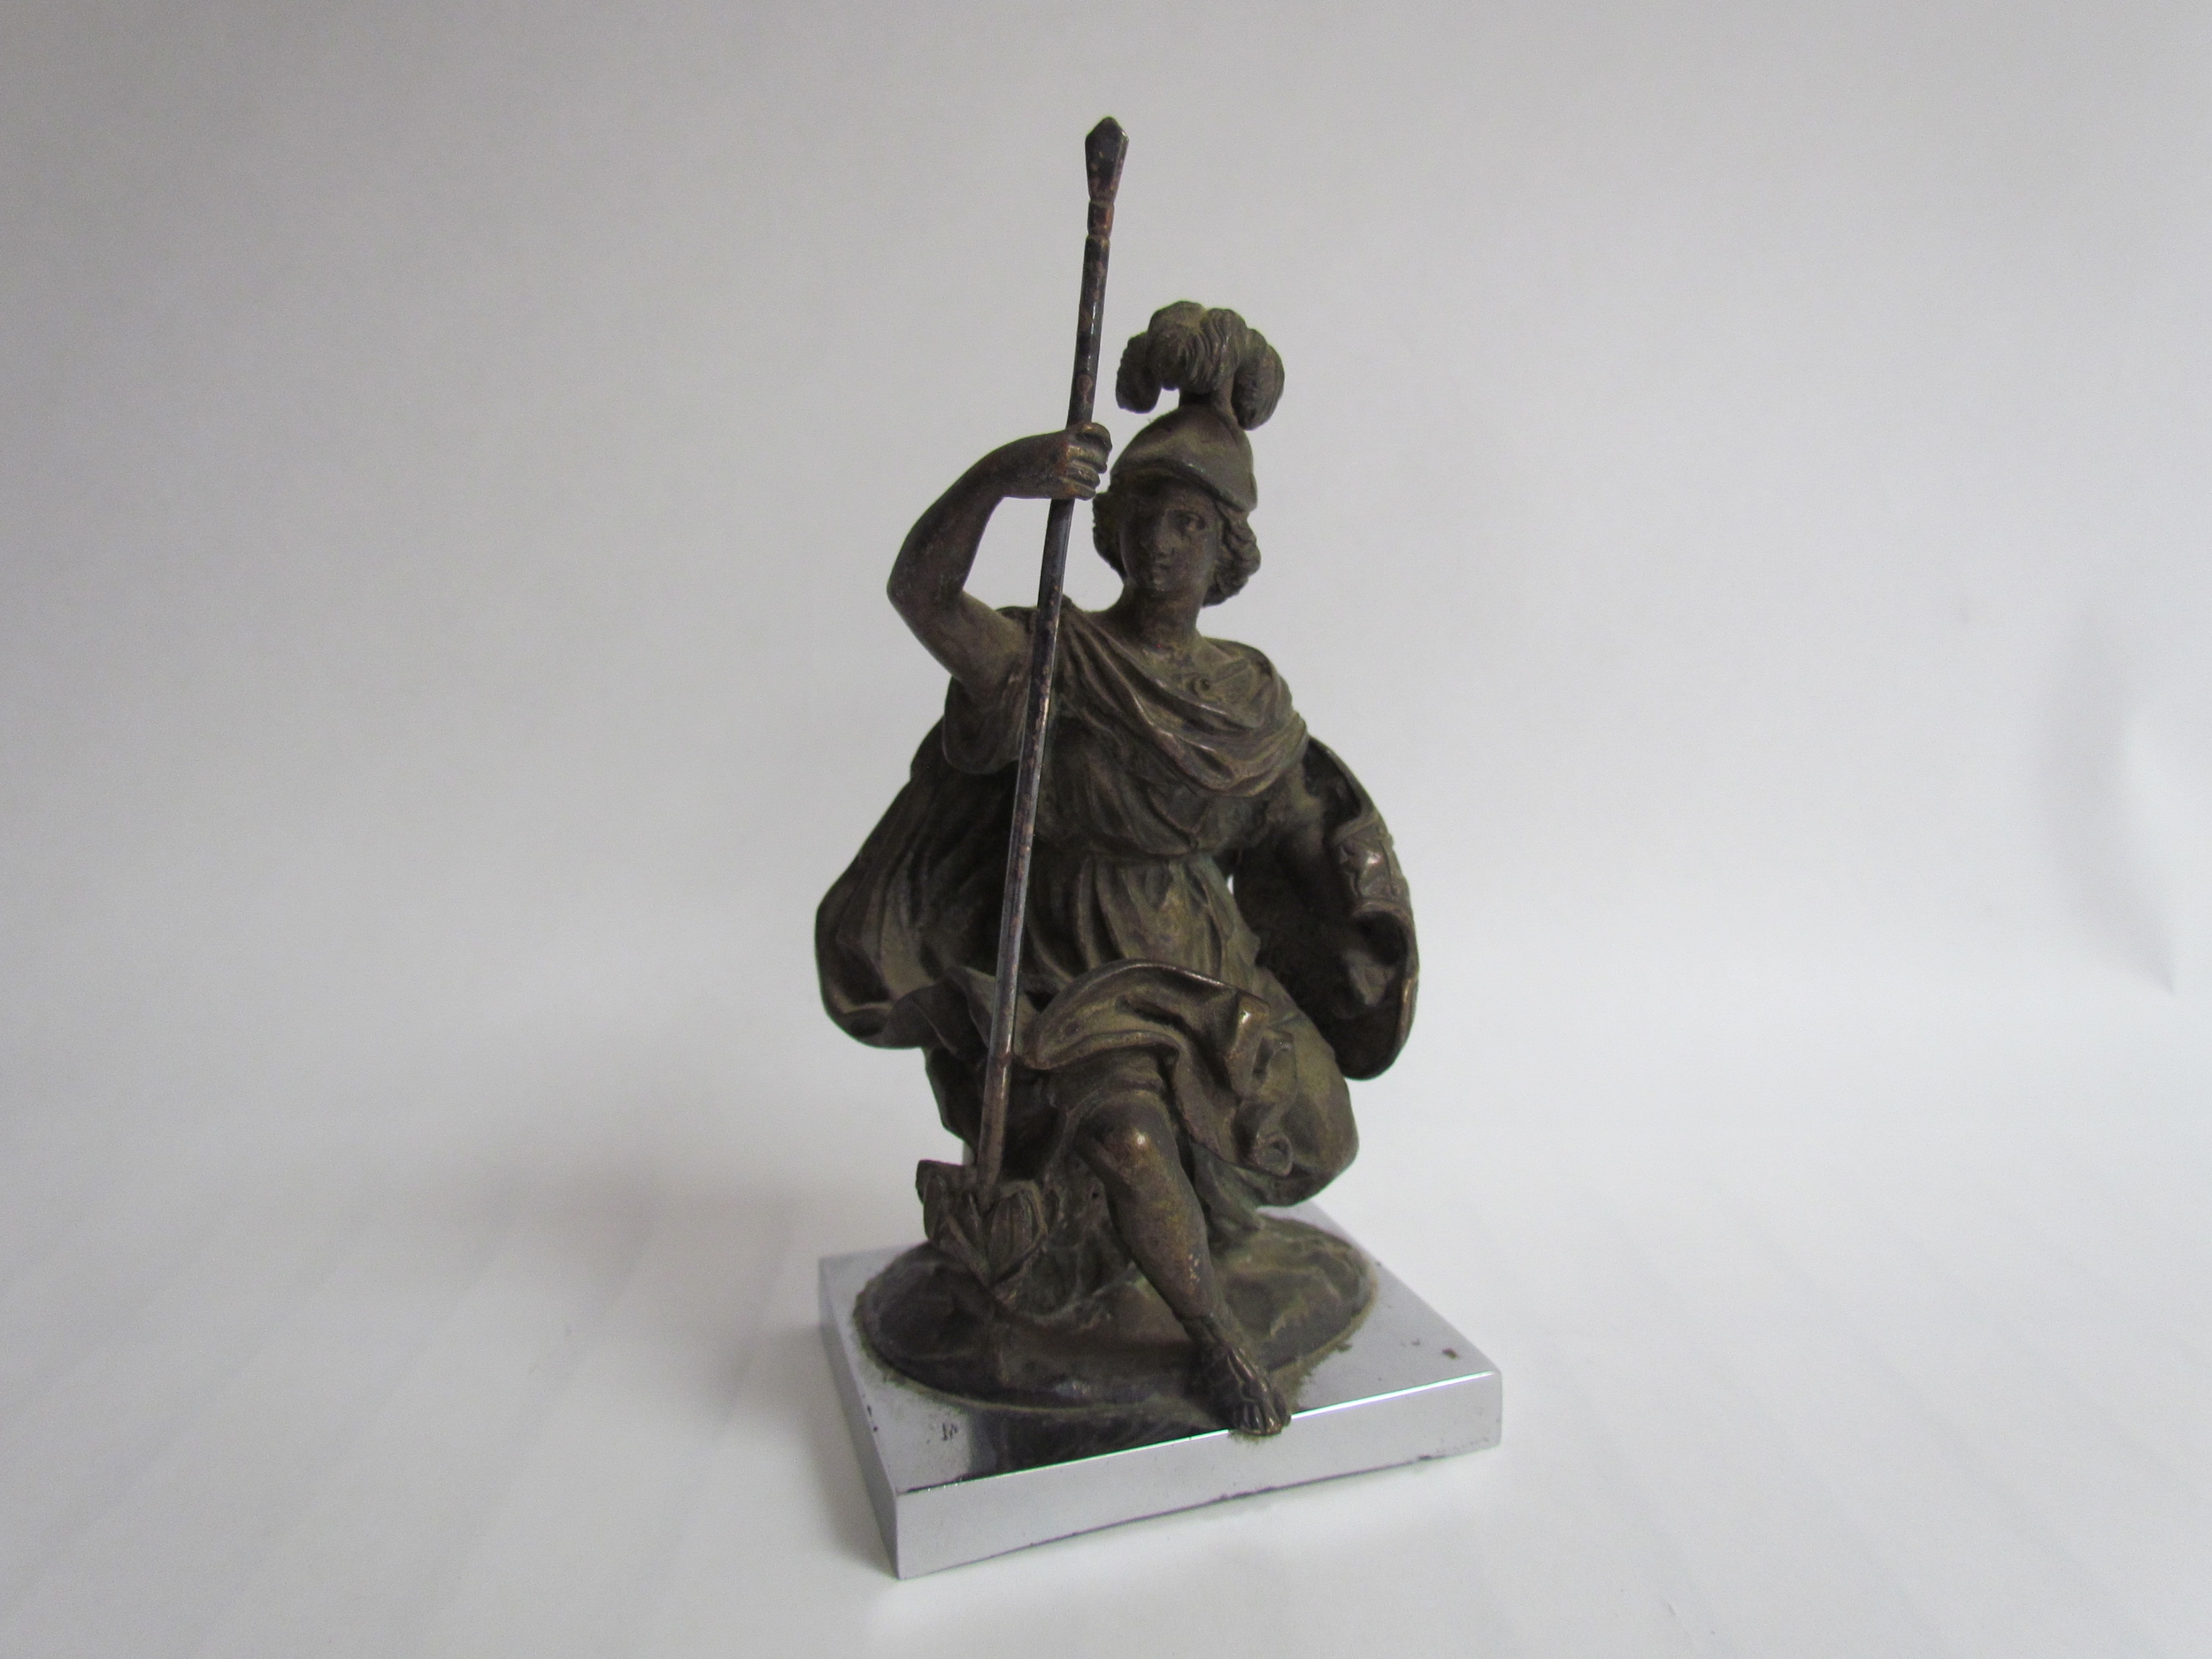 A bronze mascot in the form of a classical figure, possibly Athena goddess of wisdom